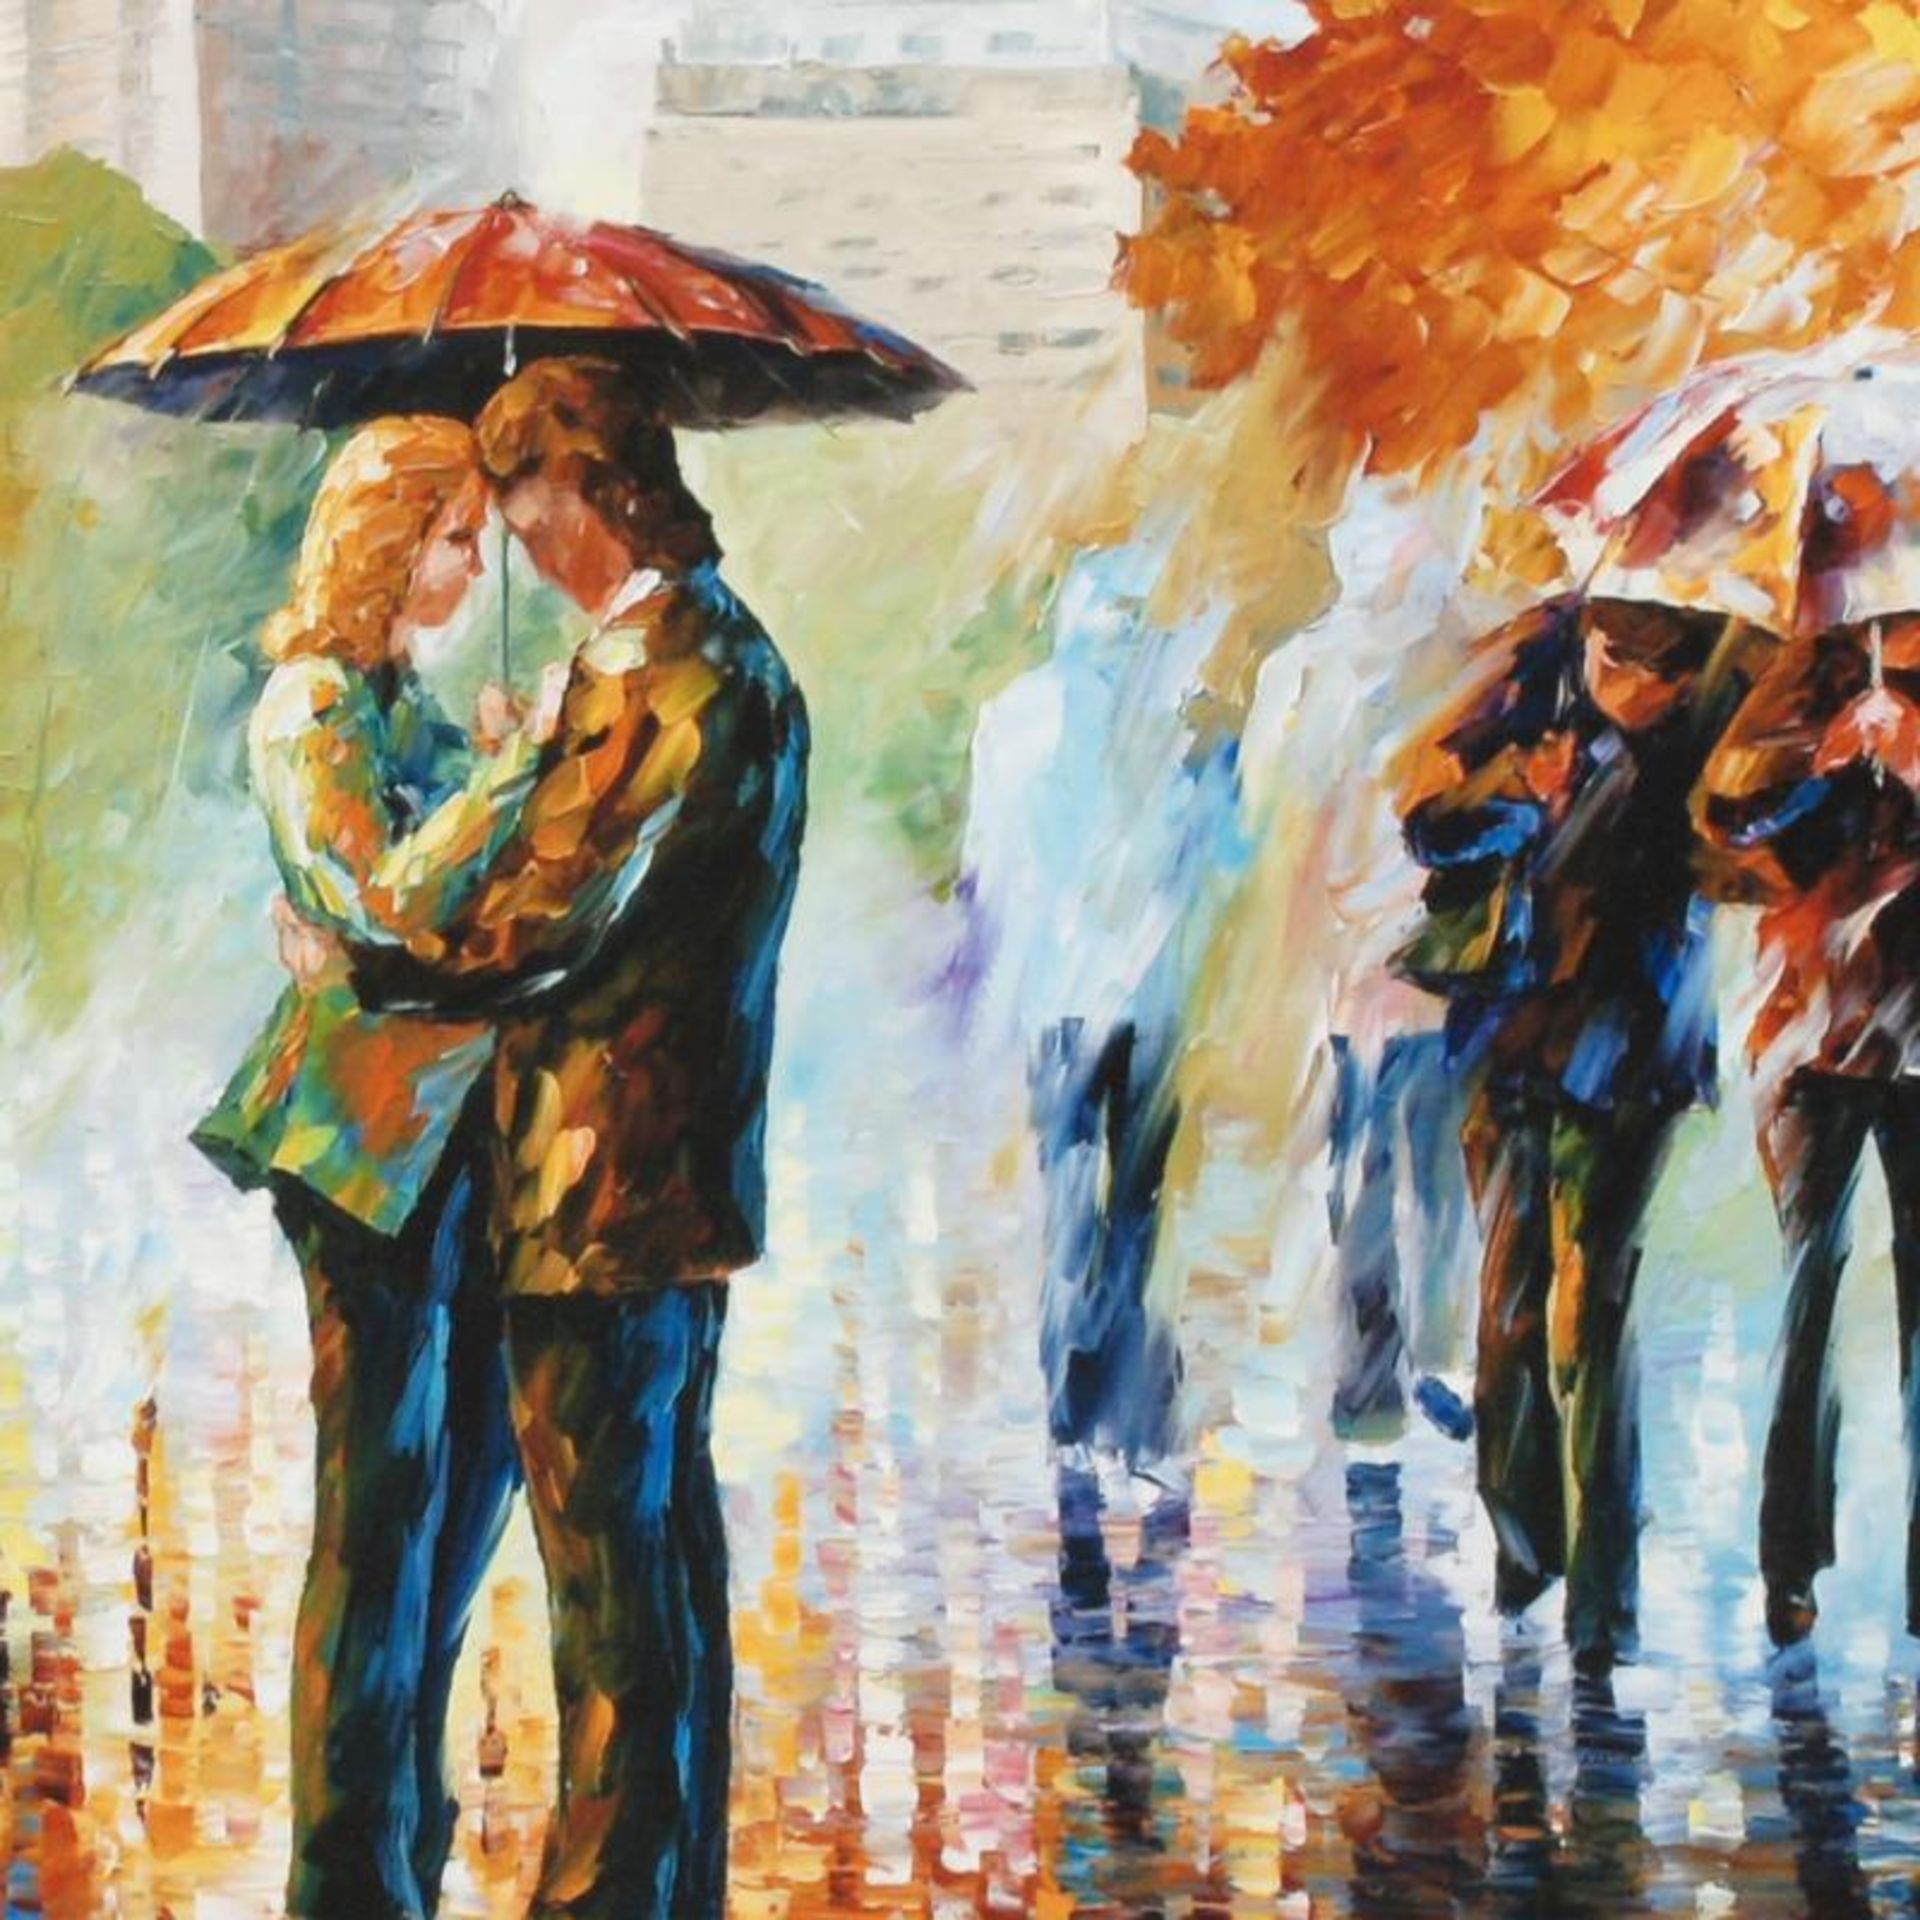 Simple Times by Afremov (1955-2019) - Image 2 of 3